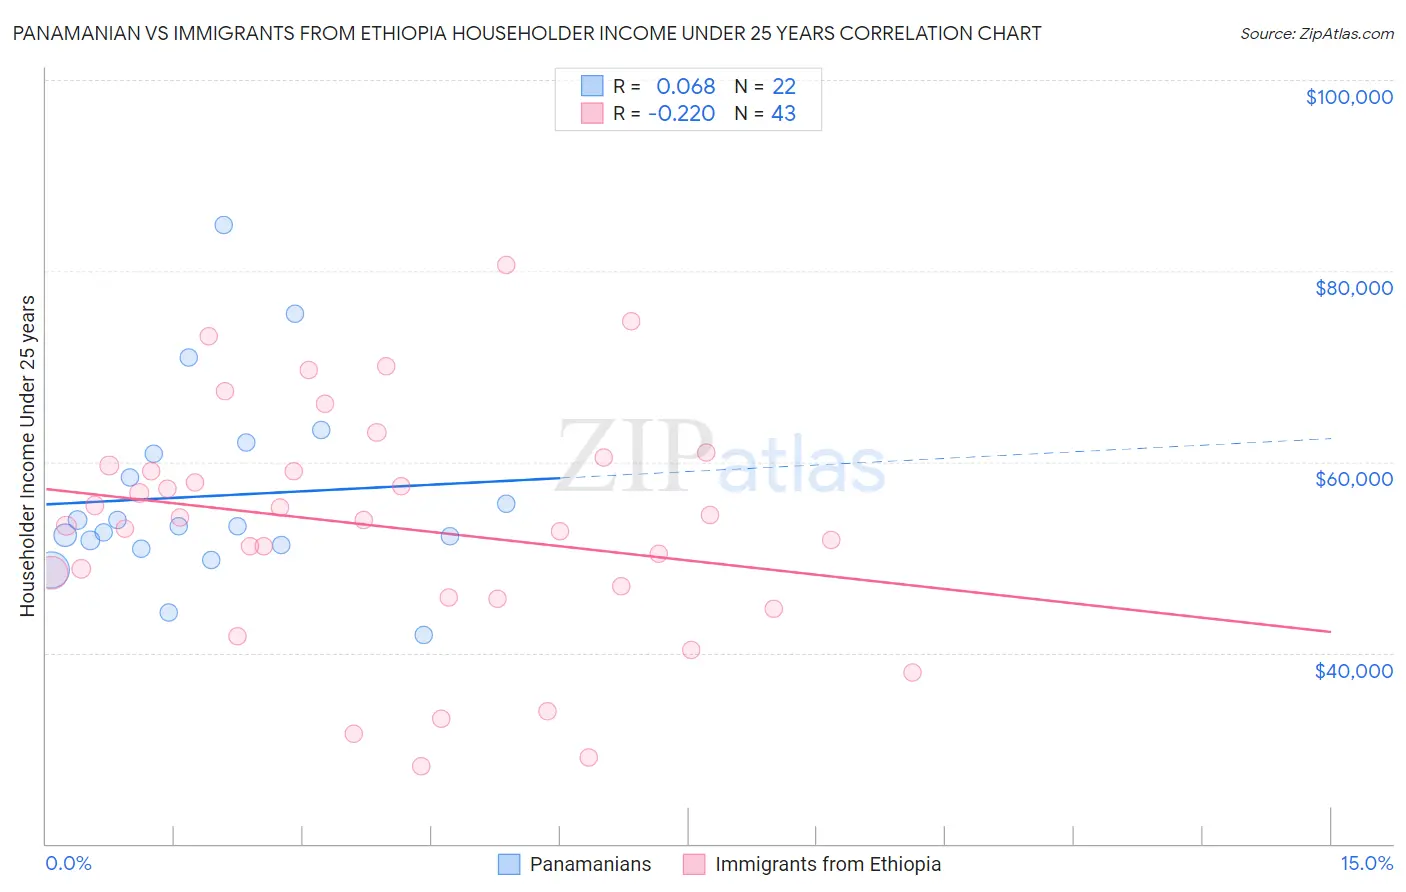 Panamanian vs Immigrants from Ethiopia Householder Income Under 25 years